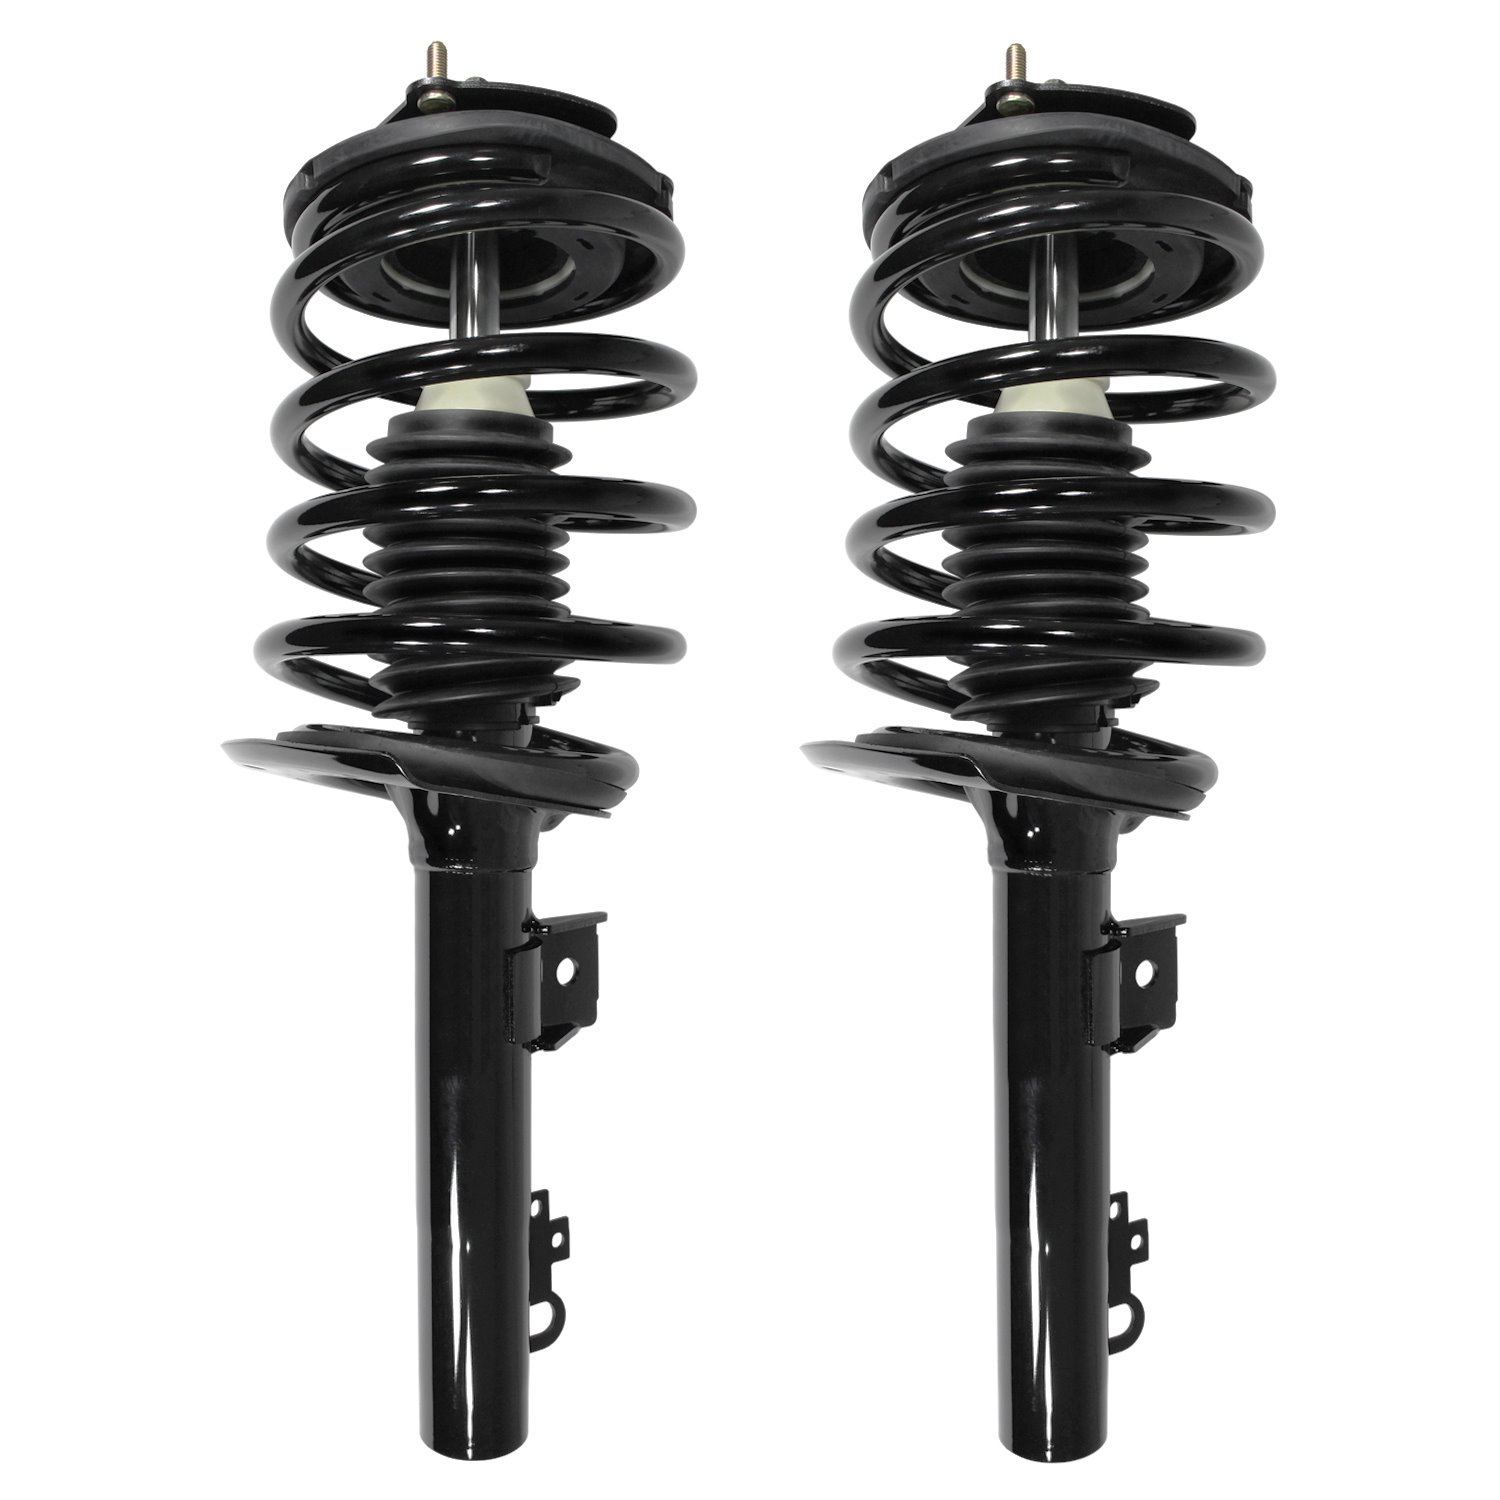 2-11010-001 Suspension Strut & Coil Spring Assembly Set Fits Select Ford Taurus, Mercury Sable